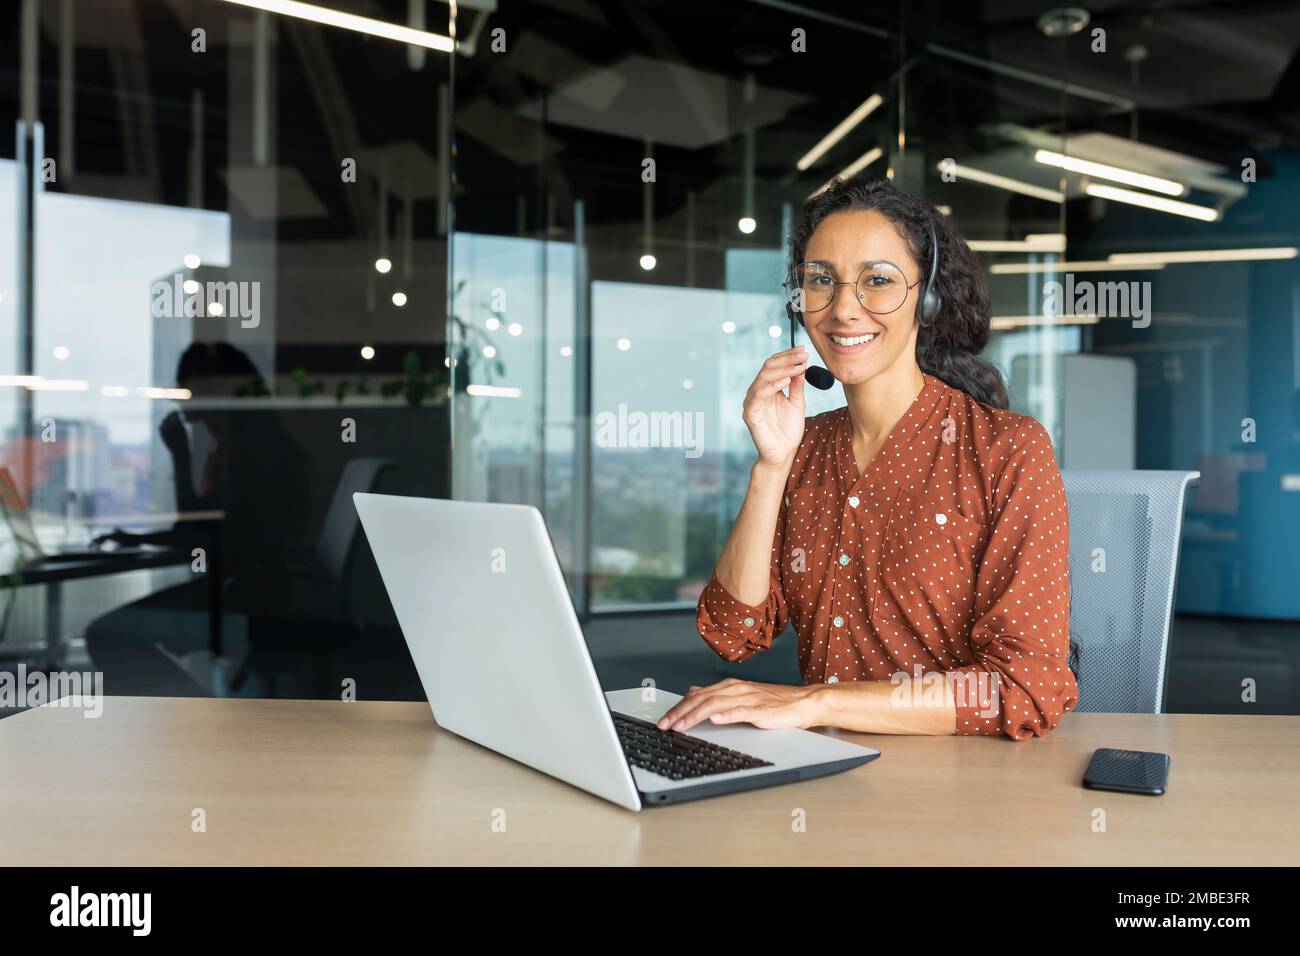 Portrait of a young beautiful Latin American woman teacher. Sitting at a desk in a headset. Teaches online, distance learning through a video call from a laptop. He looks at the camera with a smile. Stock Photo